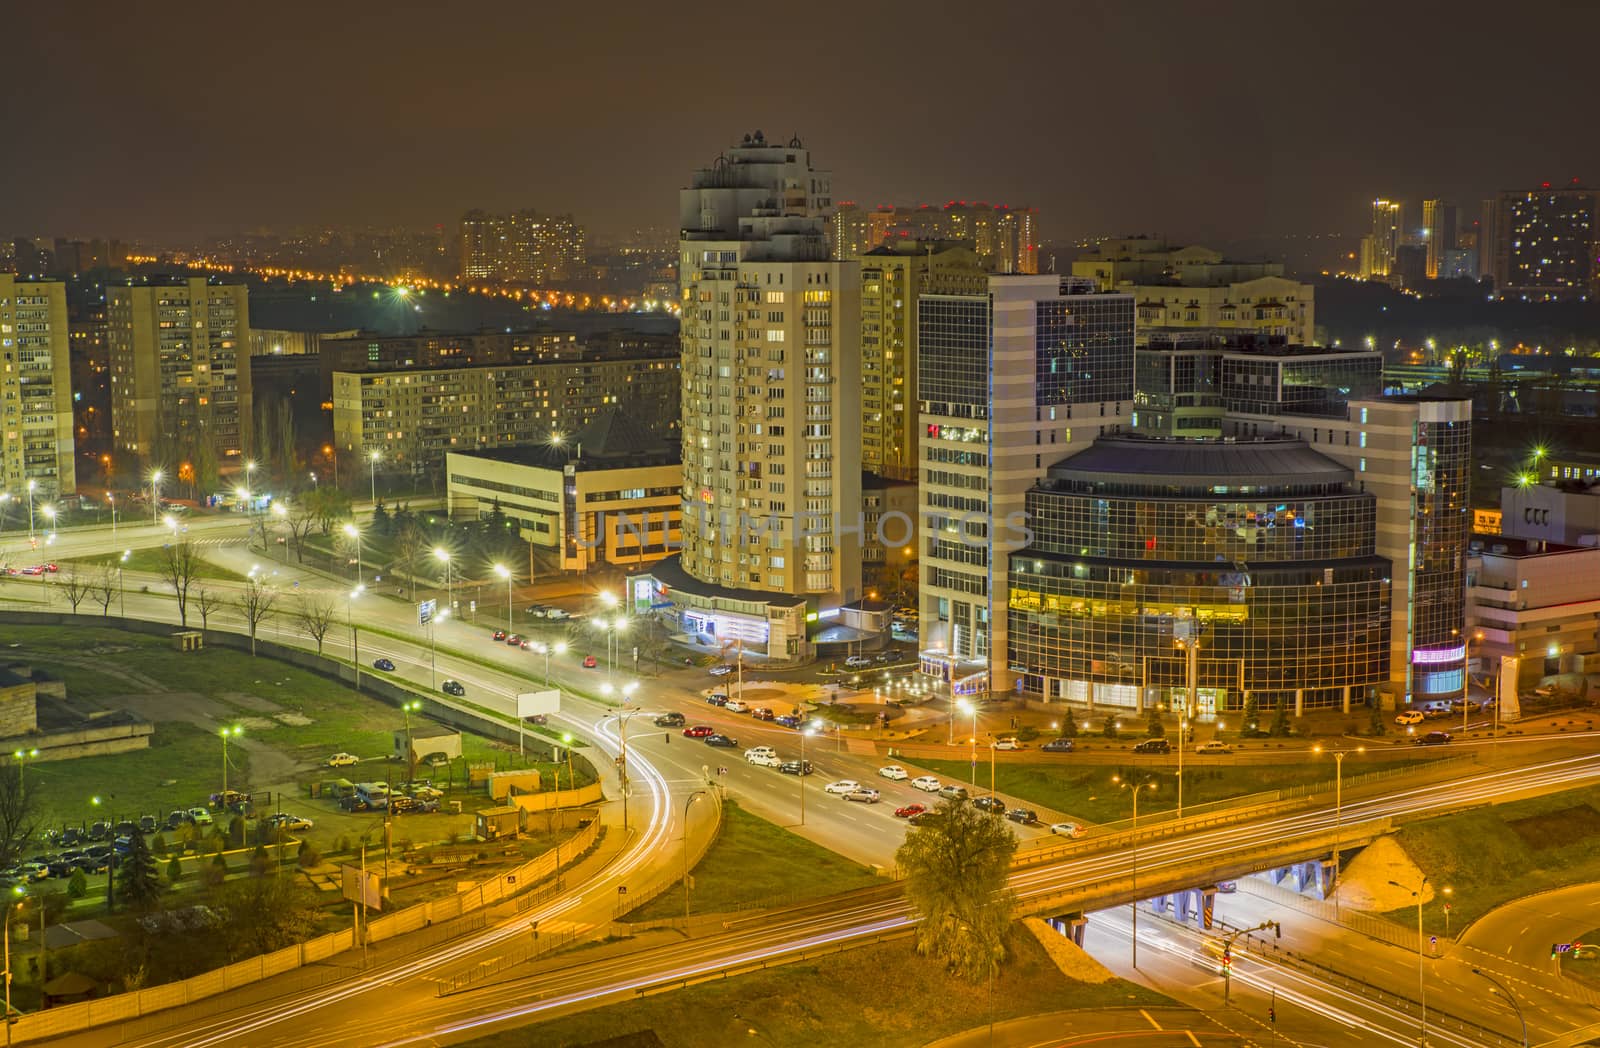 Night buildings and streets in Kiev city, ukrainean capital landscape